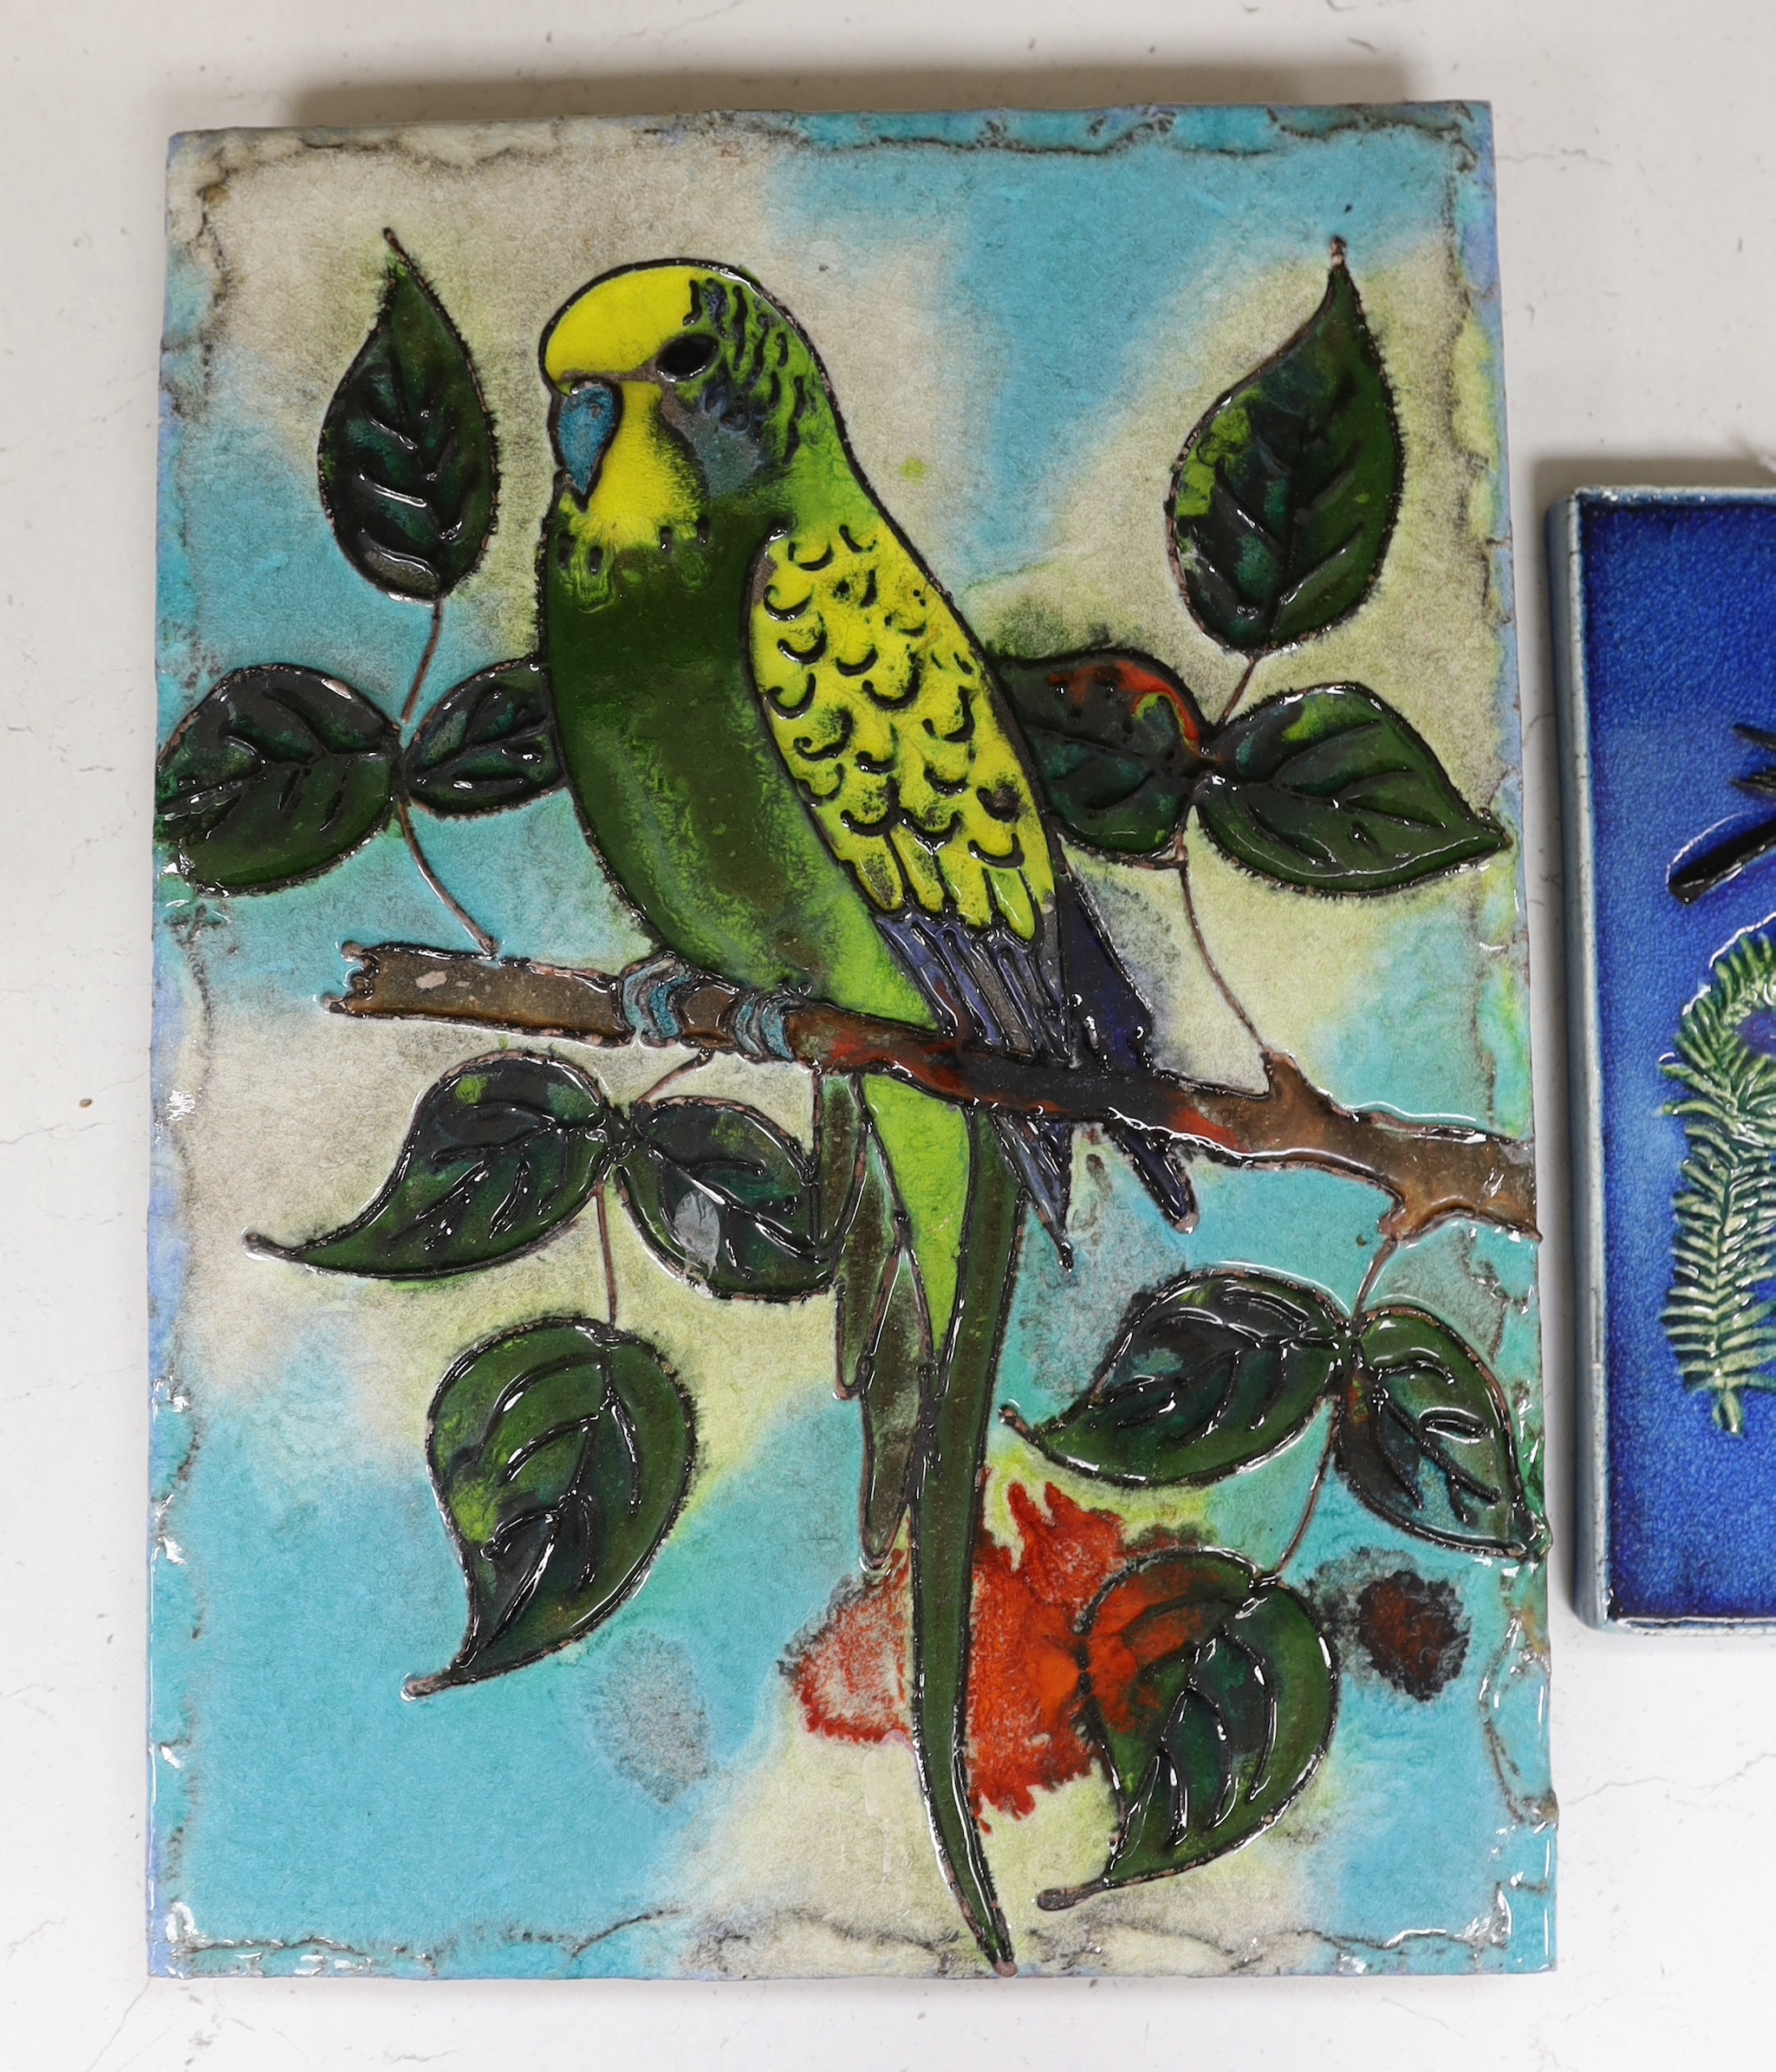 Two West German pottery Karlsruhe Majolika 1960s wall plaques of birds, the larger with budgie, smaller with blue tits, larger plaque 40 x 39.5cm